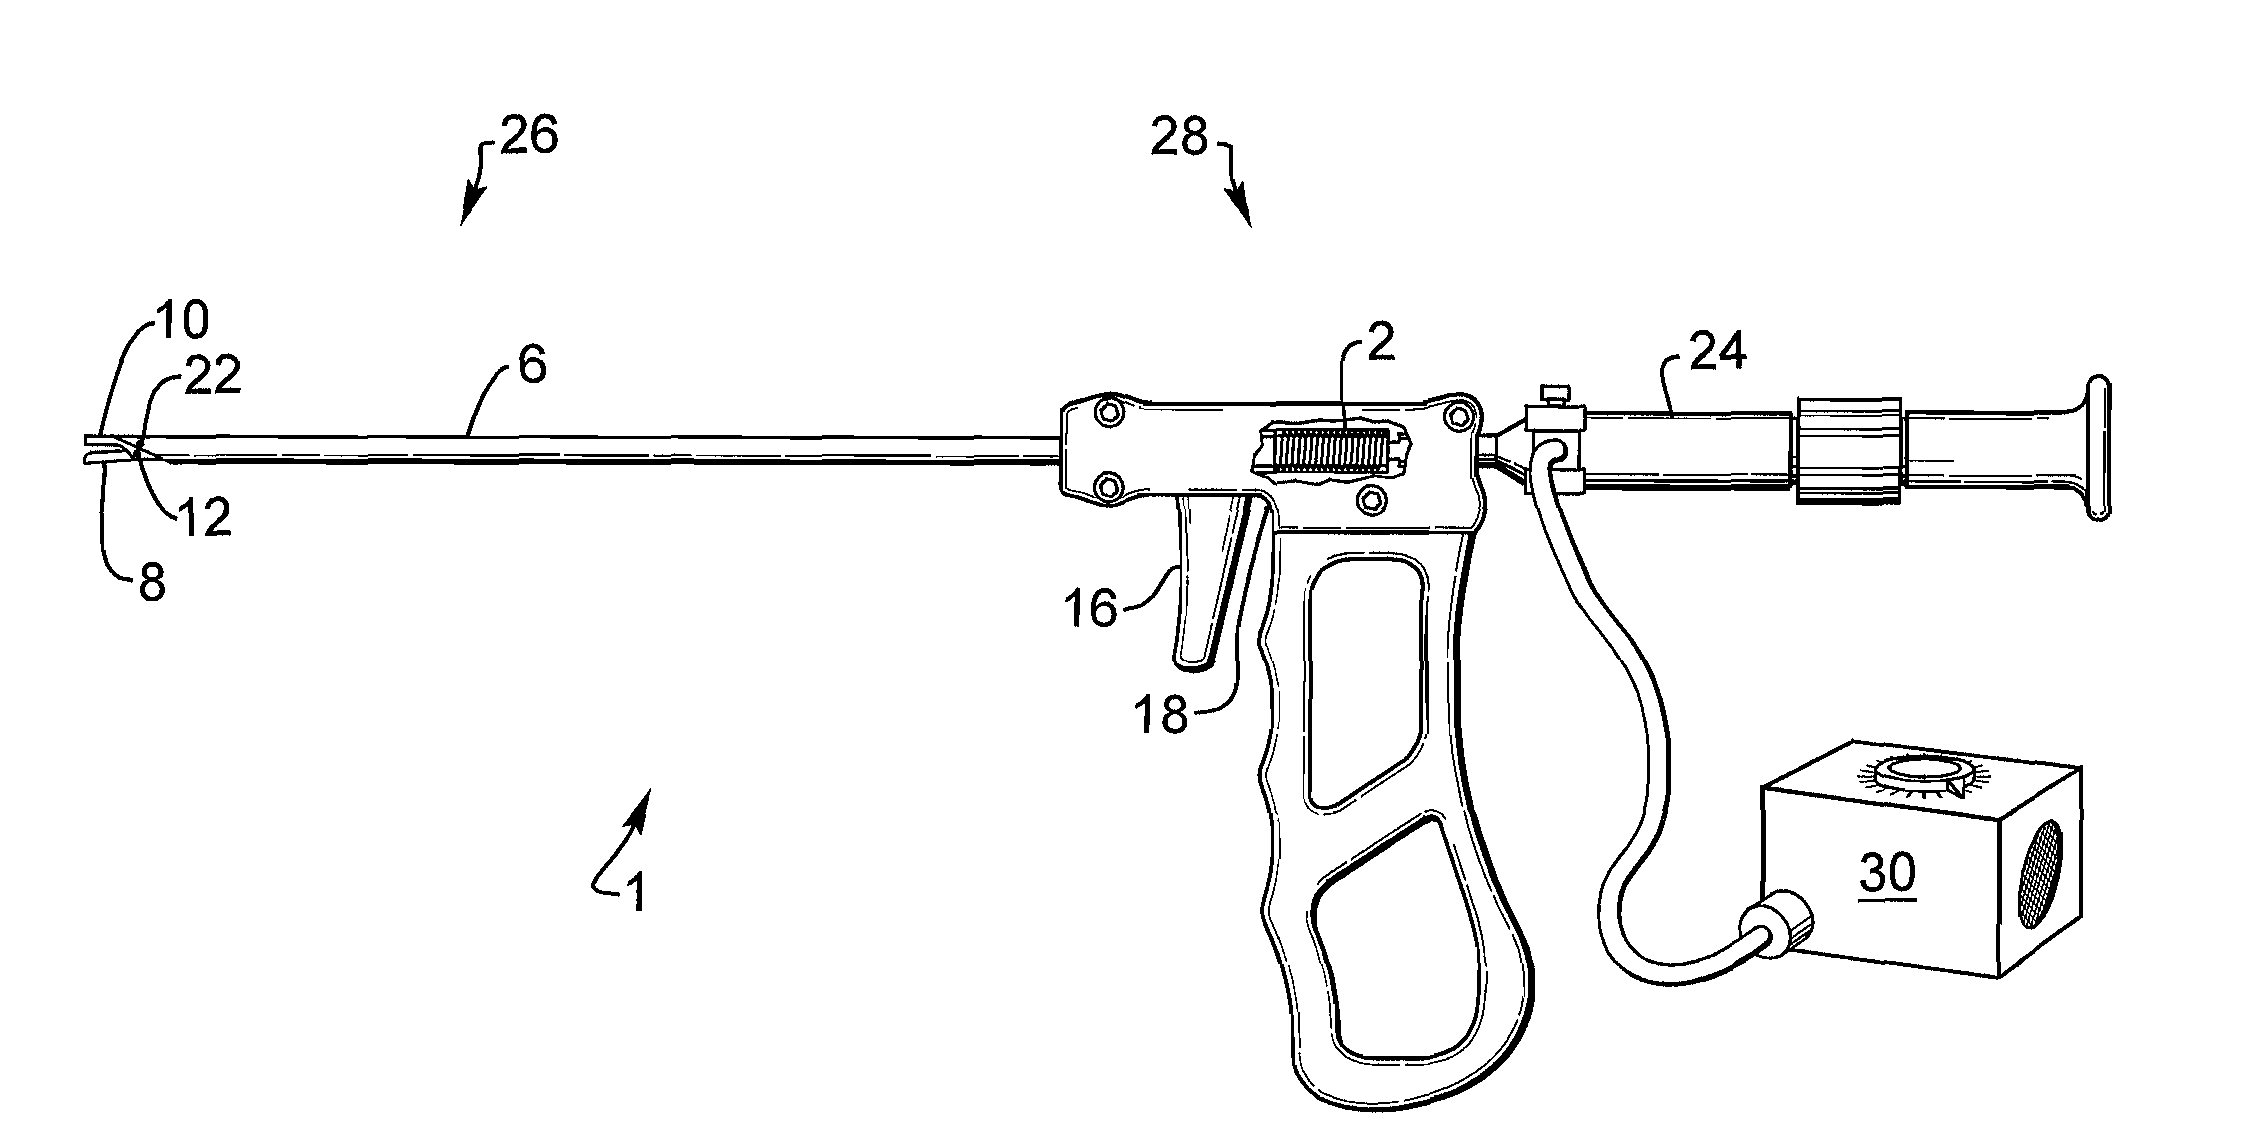 Medical device extraction tool